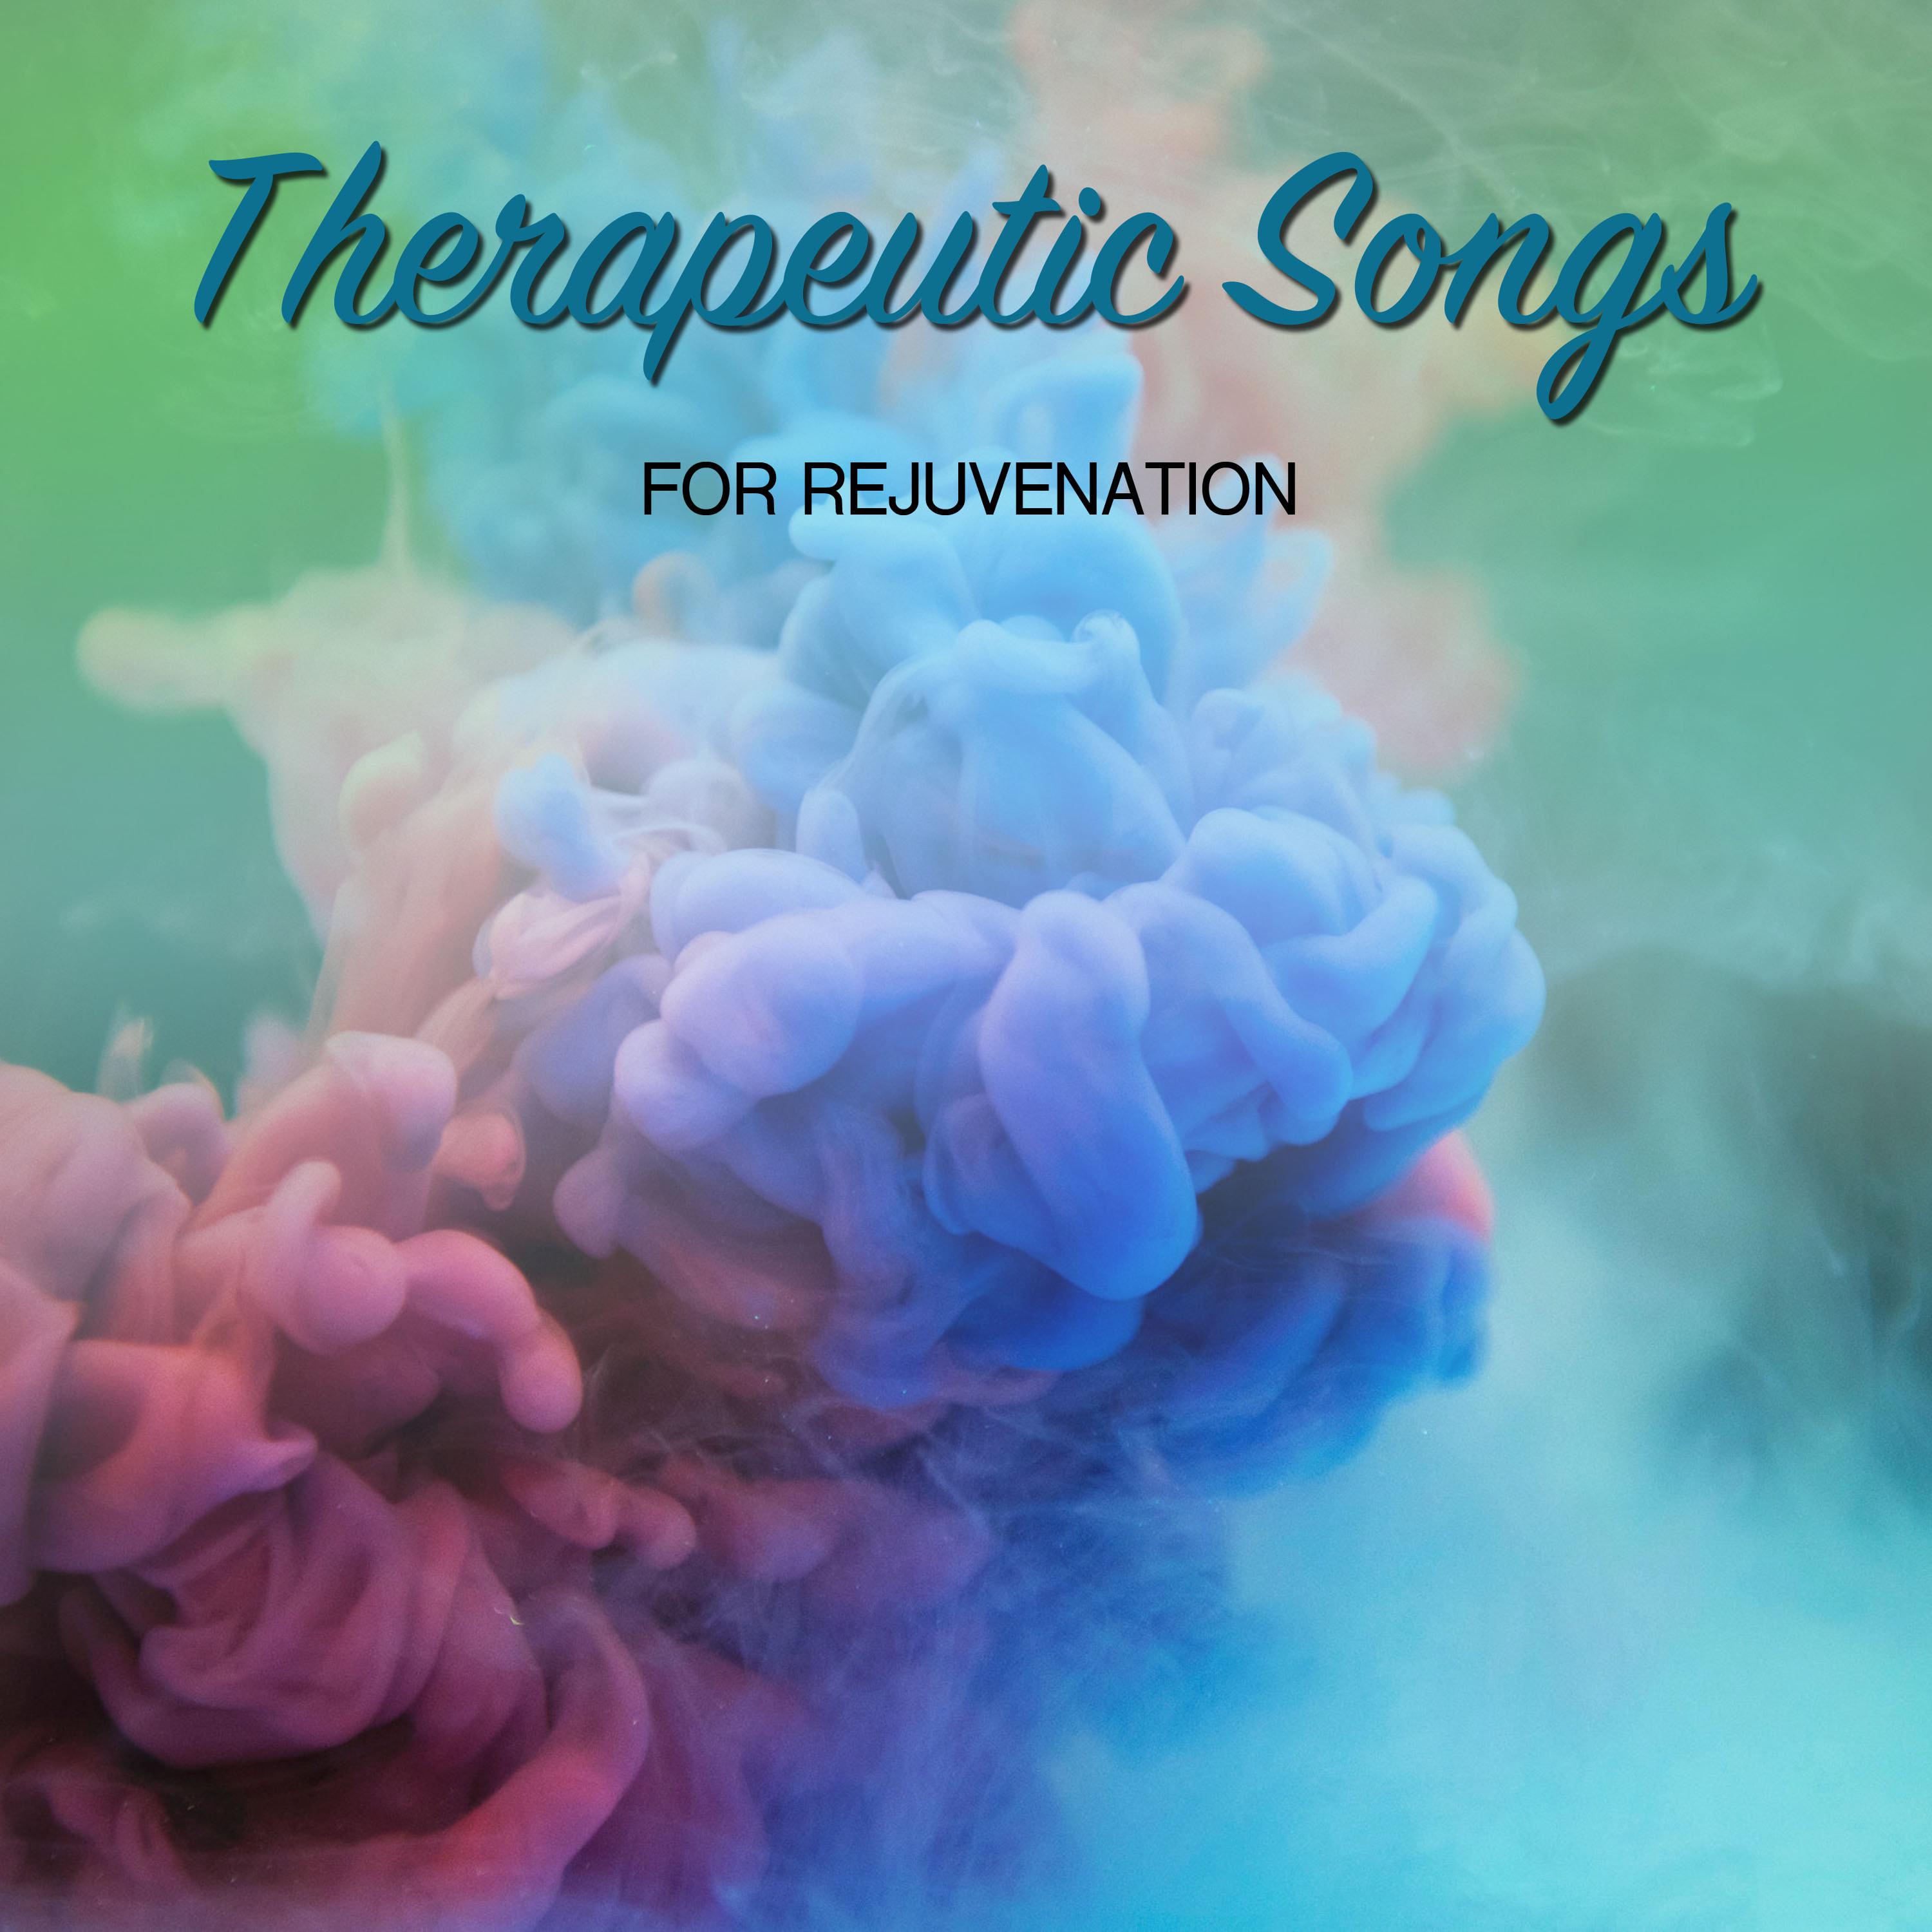 #18 Therapeutic Songs for Rejuvenation